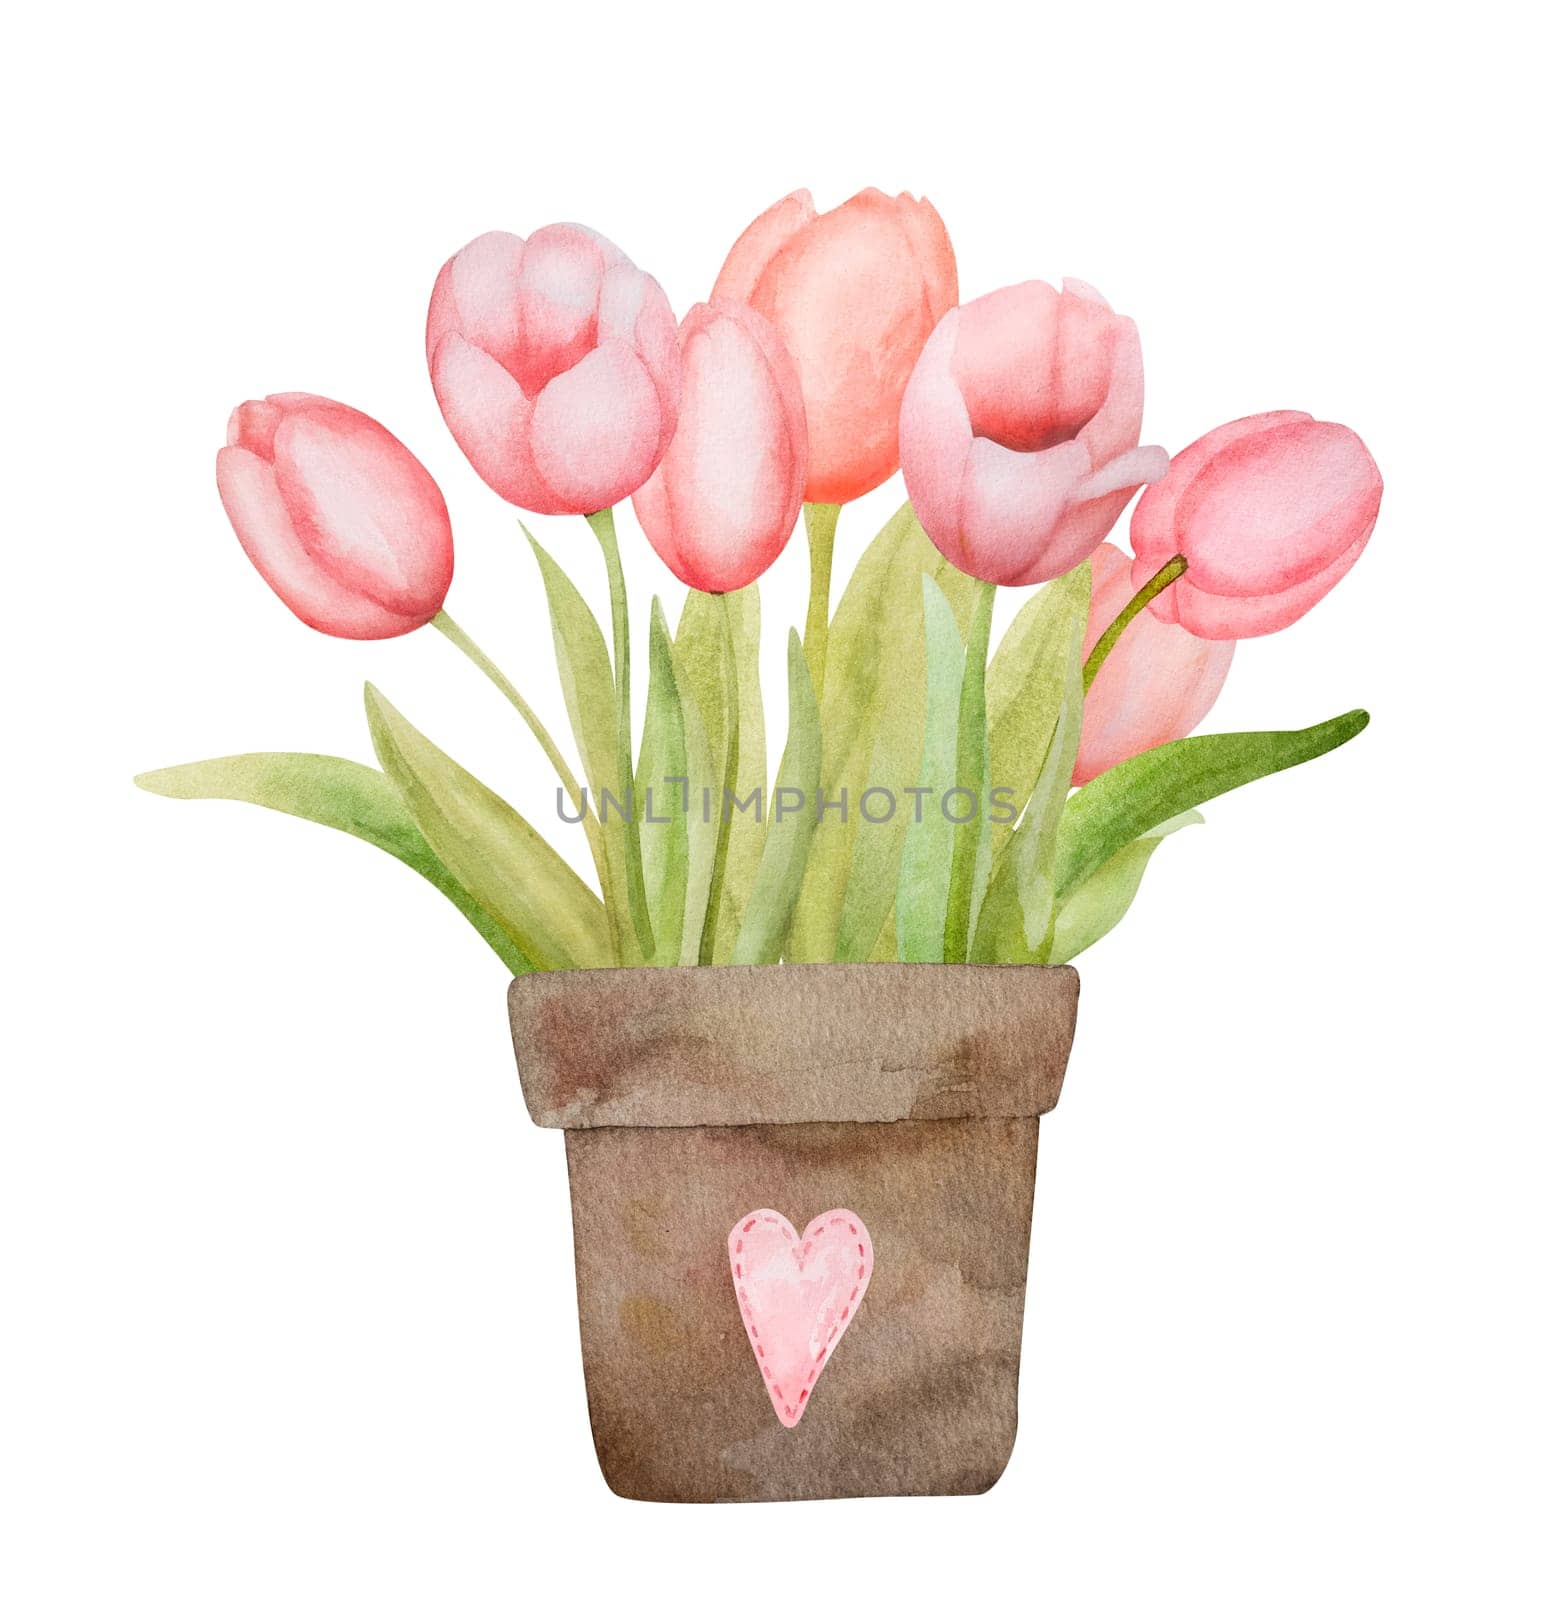 Watercolor Illustration Of Red Tulips In A Pot by tan4ikk1